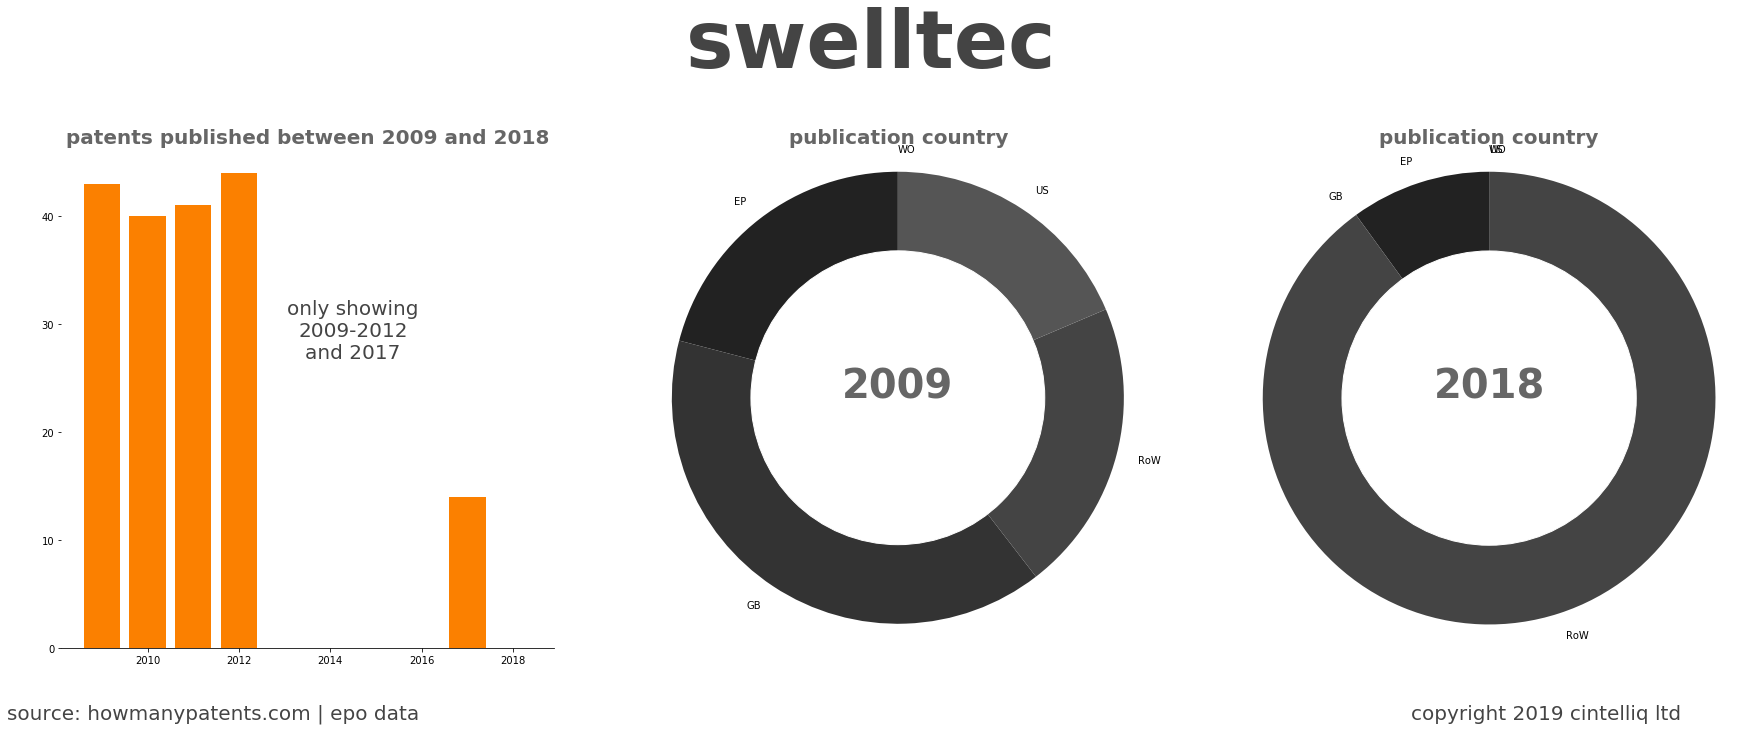 summary of patents for Swelltec